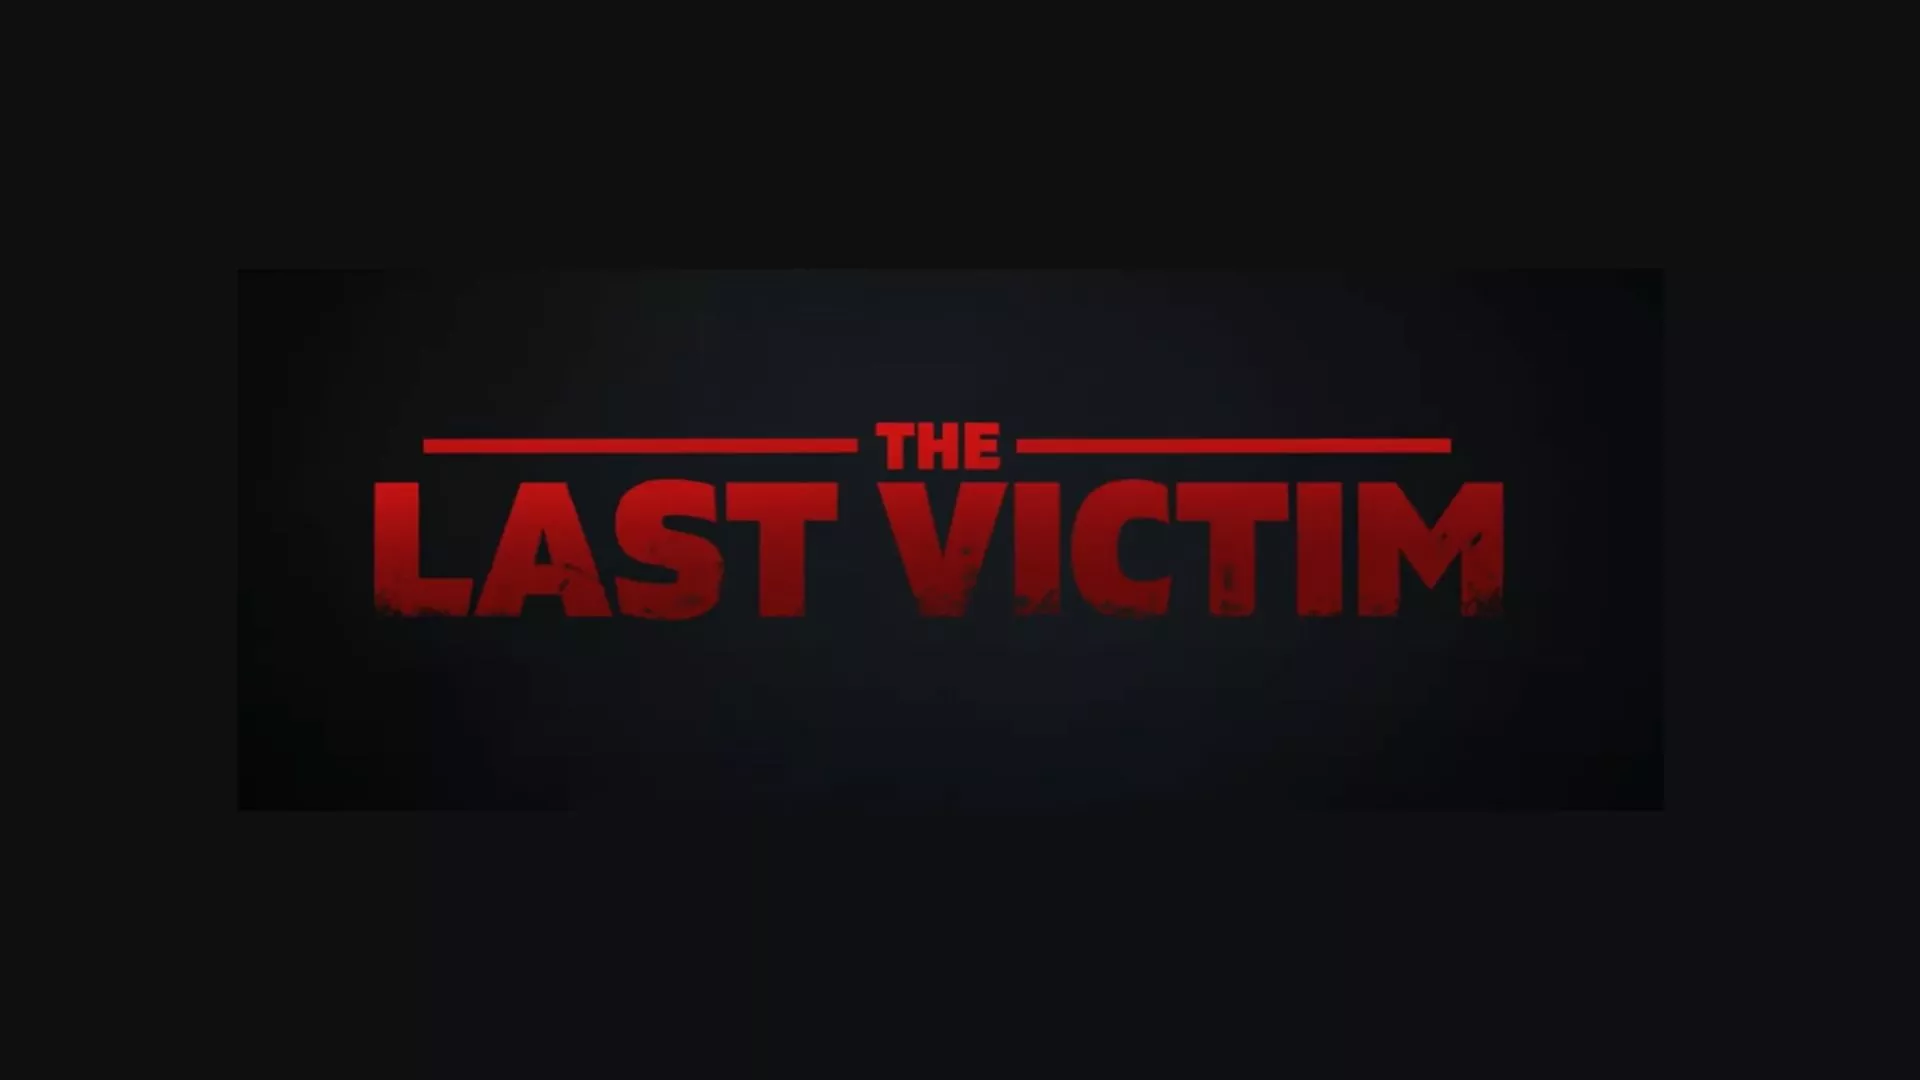 The Last Victim Parents Guide. The Last Victim Age rating. The Last Victim rlease date, cast, production, overview, trailer and images.